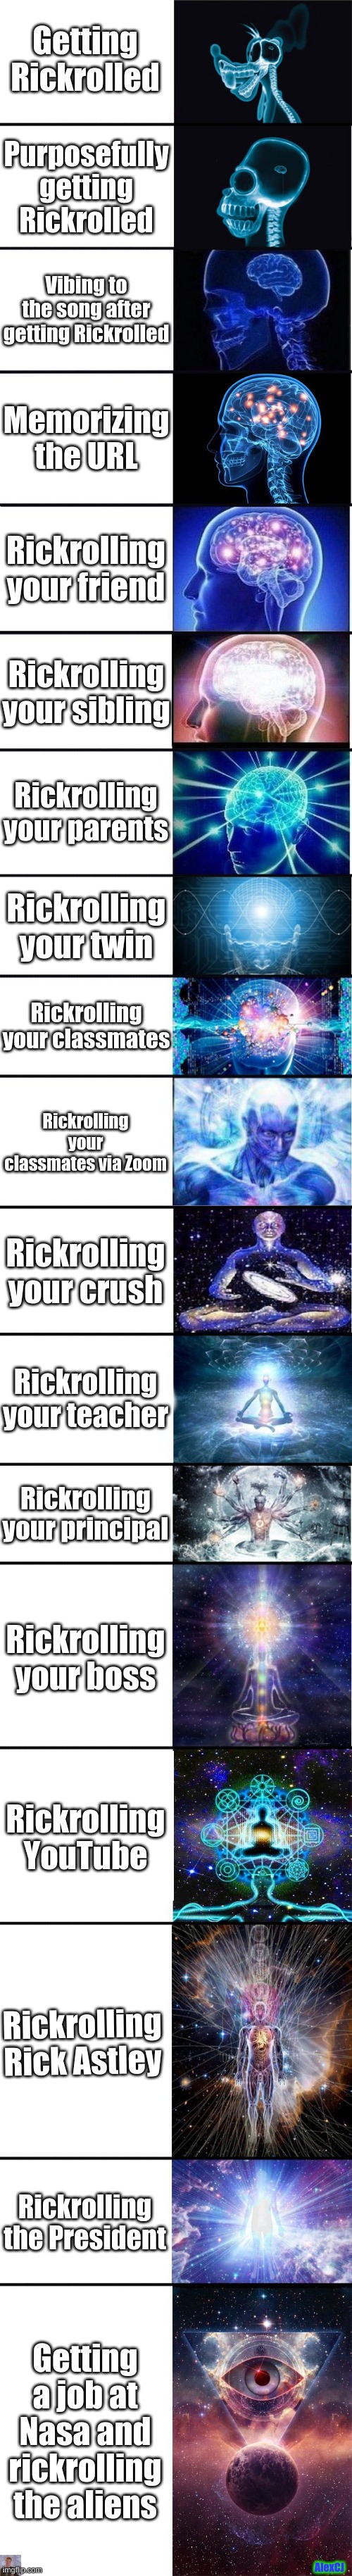 The Rickroll shall never die | Getting Rickrolled; Purposefully getting Rickrolled; Vibing to the song after getting Rickrolled; Memorizing the URL; Rickrolling your friend; Rickrolling your sibling; Rickrolling your parents; Rickrolling your twin; Rickrolling your classmates; Rickrolling your classmates via Zoom; Rickrolling your crush; Rickrolling your teacher; Rickrolling your principal; Rickrolling your boss; Rickrolling YouTube; Rickrolling Rick Astley; Rickrolling the President; Getting a job at Nasa and rickrolling the aliens; AlexCJ | image tagged in memes,funny memes,dank memes,rickroll,oh wow are you actually reading these tags,ha ha tags go brr | made w/ Imgflip meme maker